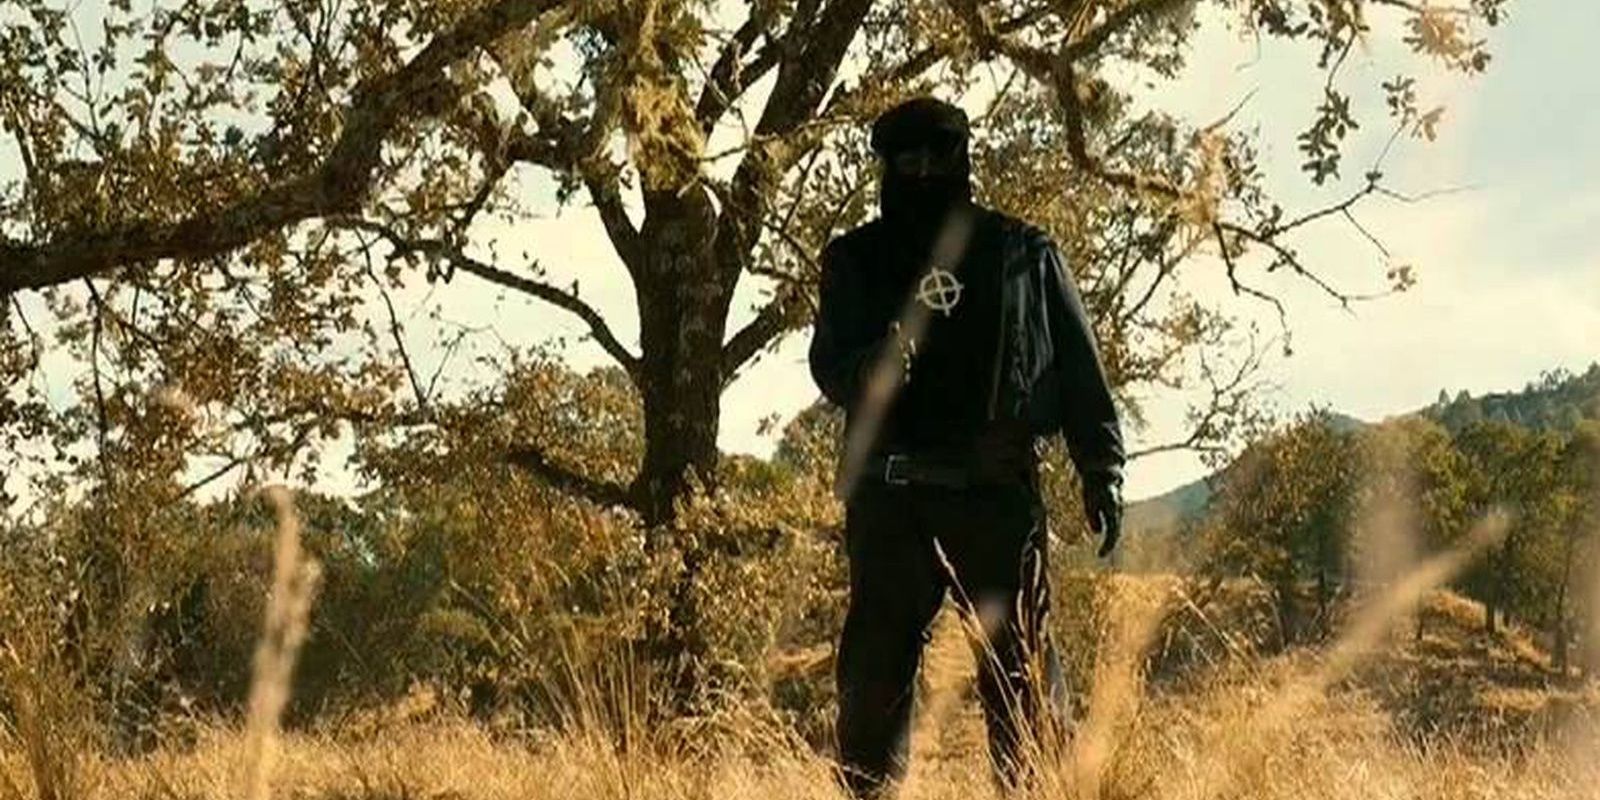 A man clad all in black brandishes a gun in the woods